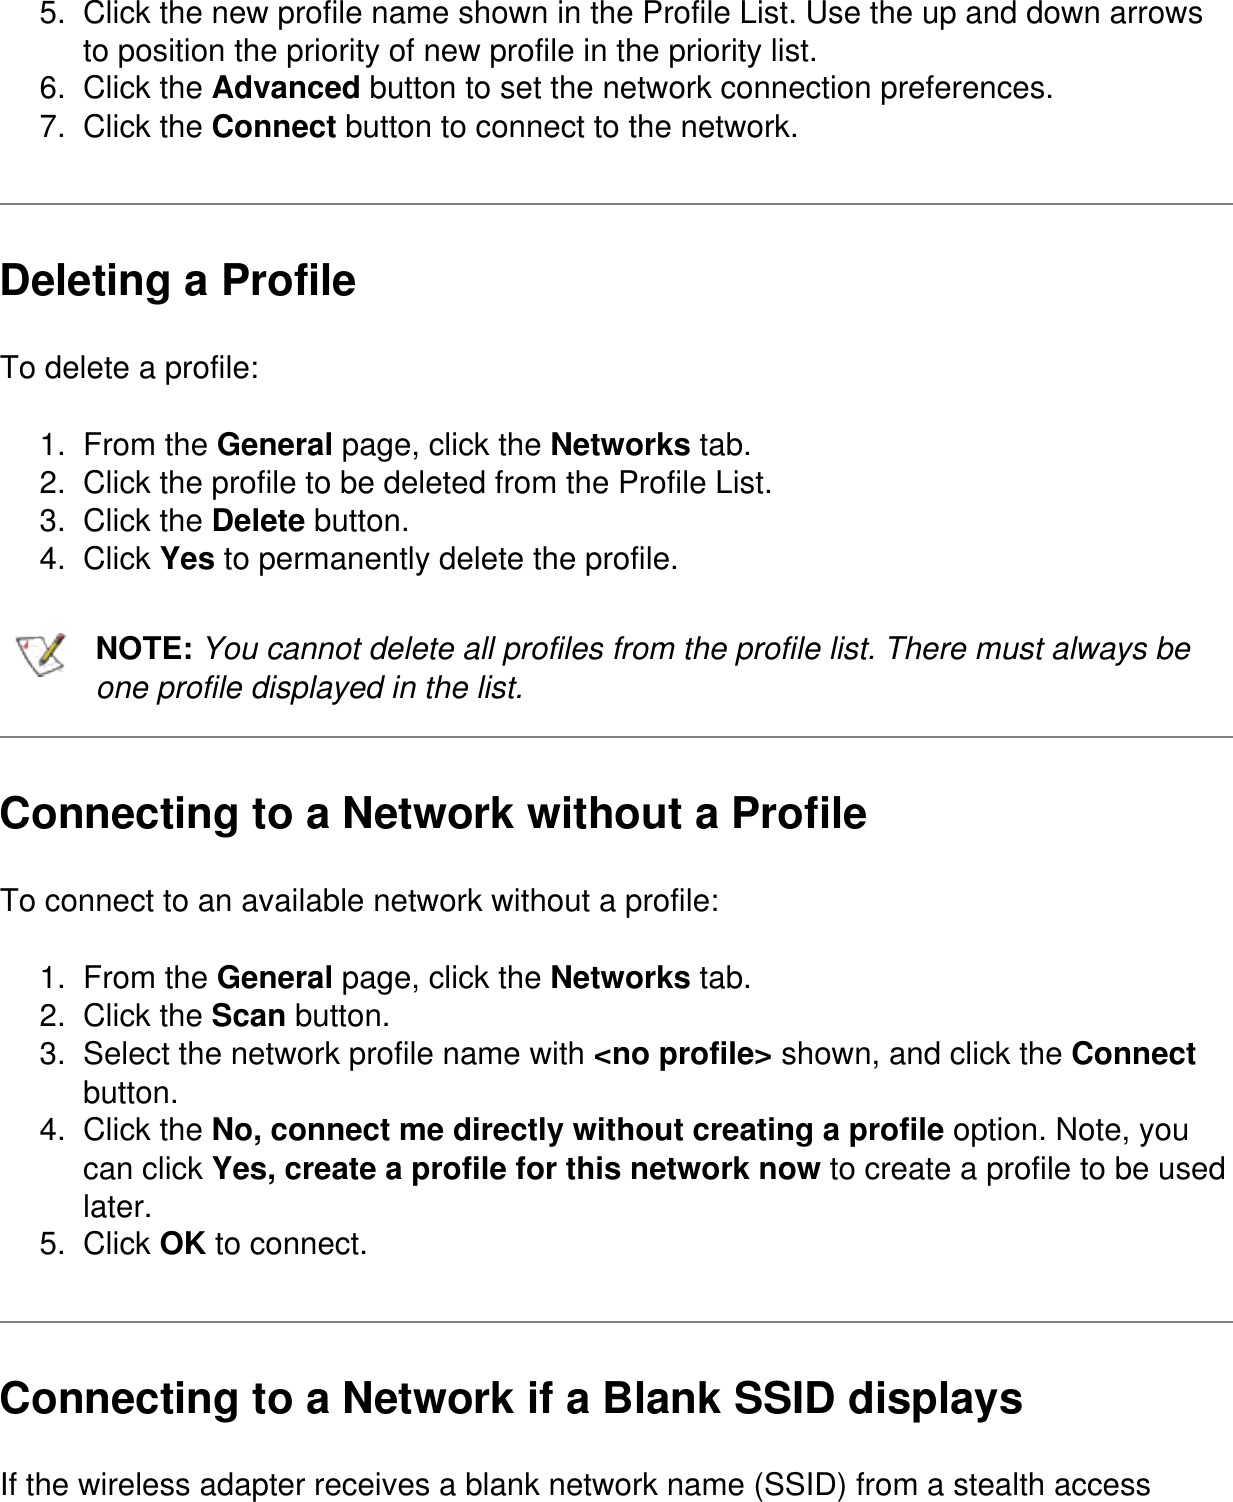 5.  Click the new profile name shown in the Profile List. Use the up and down arrows to position the priority of new profile in the priority list.6.  Click the Advanced button to set the network connection preferences.7.  Click the Connect button to connect to the network.Deleting a ProfileTo delete a profile:1.  From the General page, click the Networks tab.2.  Click the profile to be deleted from the Profile List.3.  Click the Delete button.4.  Click Yes to permanently delete the profile.NOTE: You cannot delete all profiles from the profile list. There must always be one profile displayed in the list.Connecting to a Network without a ProfileTo connect to an available network without a profile:1.  From the General page, click the Networks tab.2.  Click the Scan button.3.  Select the network profile name with &lt;no profile&gt; shown, and click the Connect button.4.  Click the No, connect me directly without creating a profile option. Note, you can click Yes, create a profile for this network now to create a profile to be used later.5.  Click OK to connect.Connecting to a Network if a Blank SSID displaysIf the wireless adapter receives a blank network name (SSID) from a stealth access 